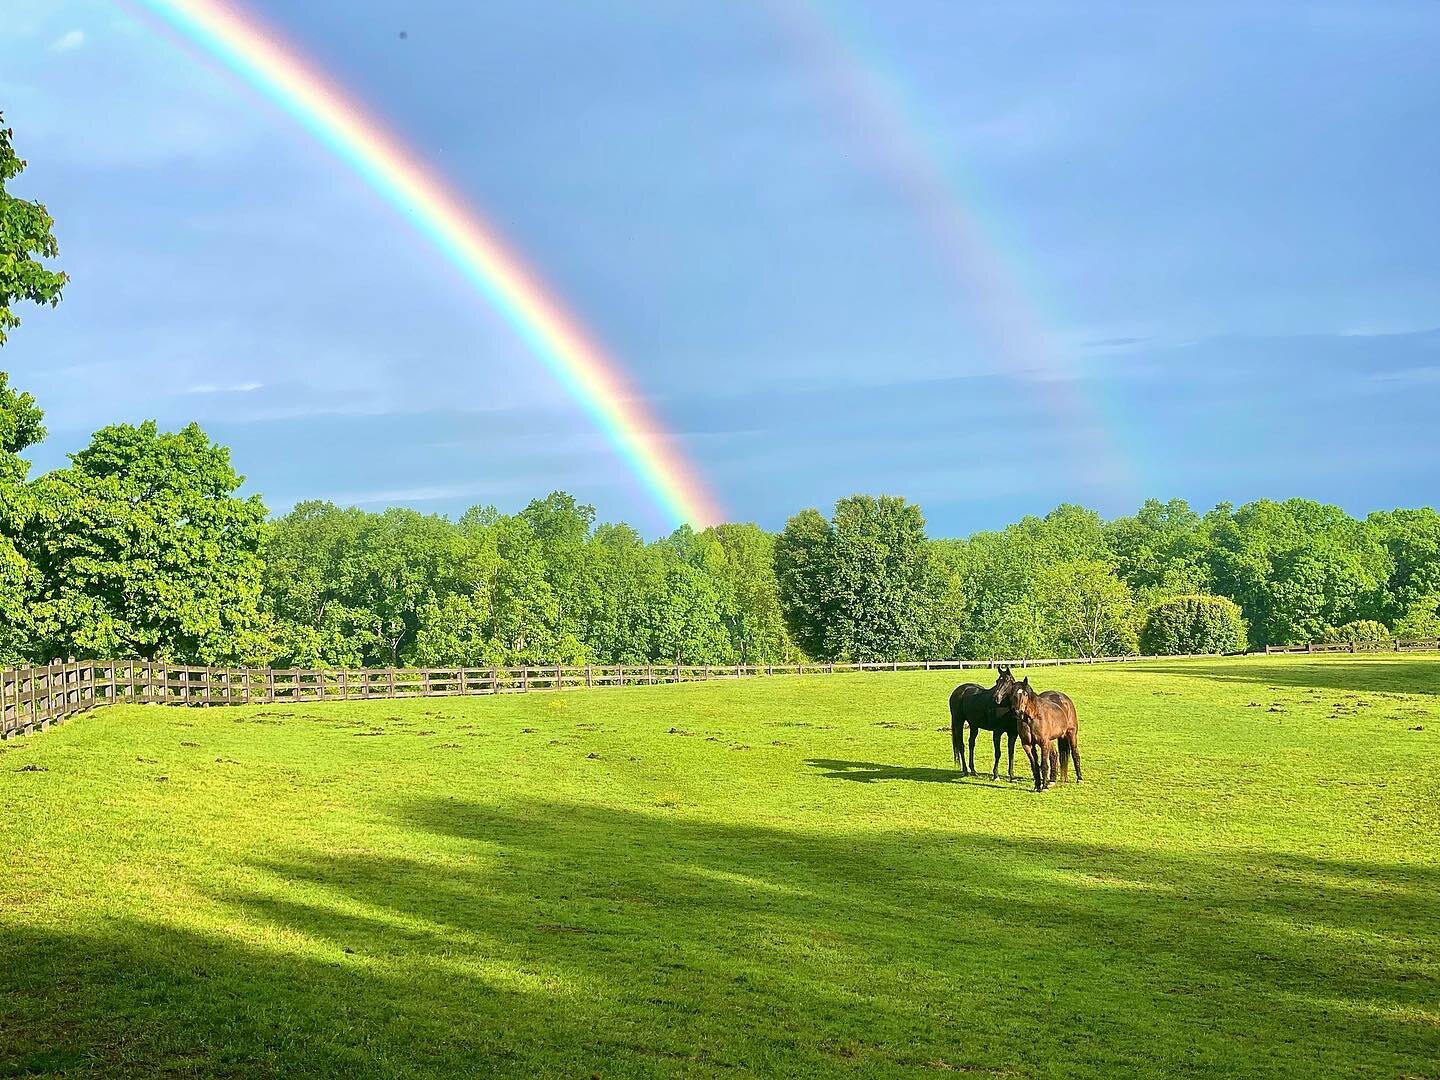 🌈🐴 Our pot of gold at the end of the rainbow. #therapyhorses
.
.
🌧️ This morning&rsquo;s rain brought the most beautiful double rainbow that stretched clear over the farm&mdash;a perfect close to April, and welcome to May, #mentalhealthawarenessmo